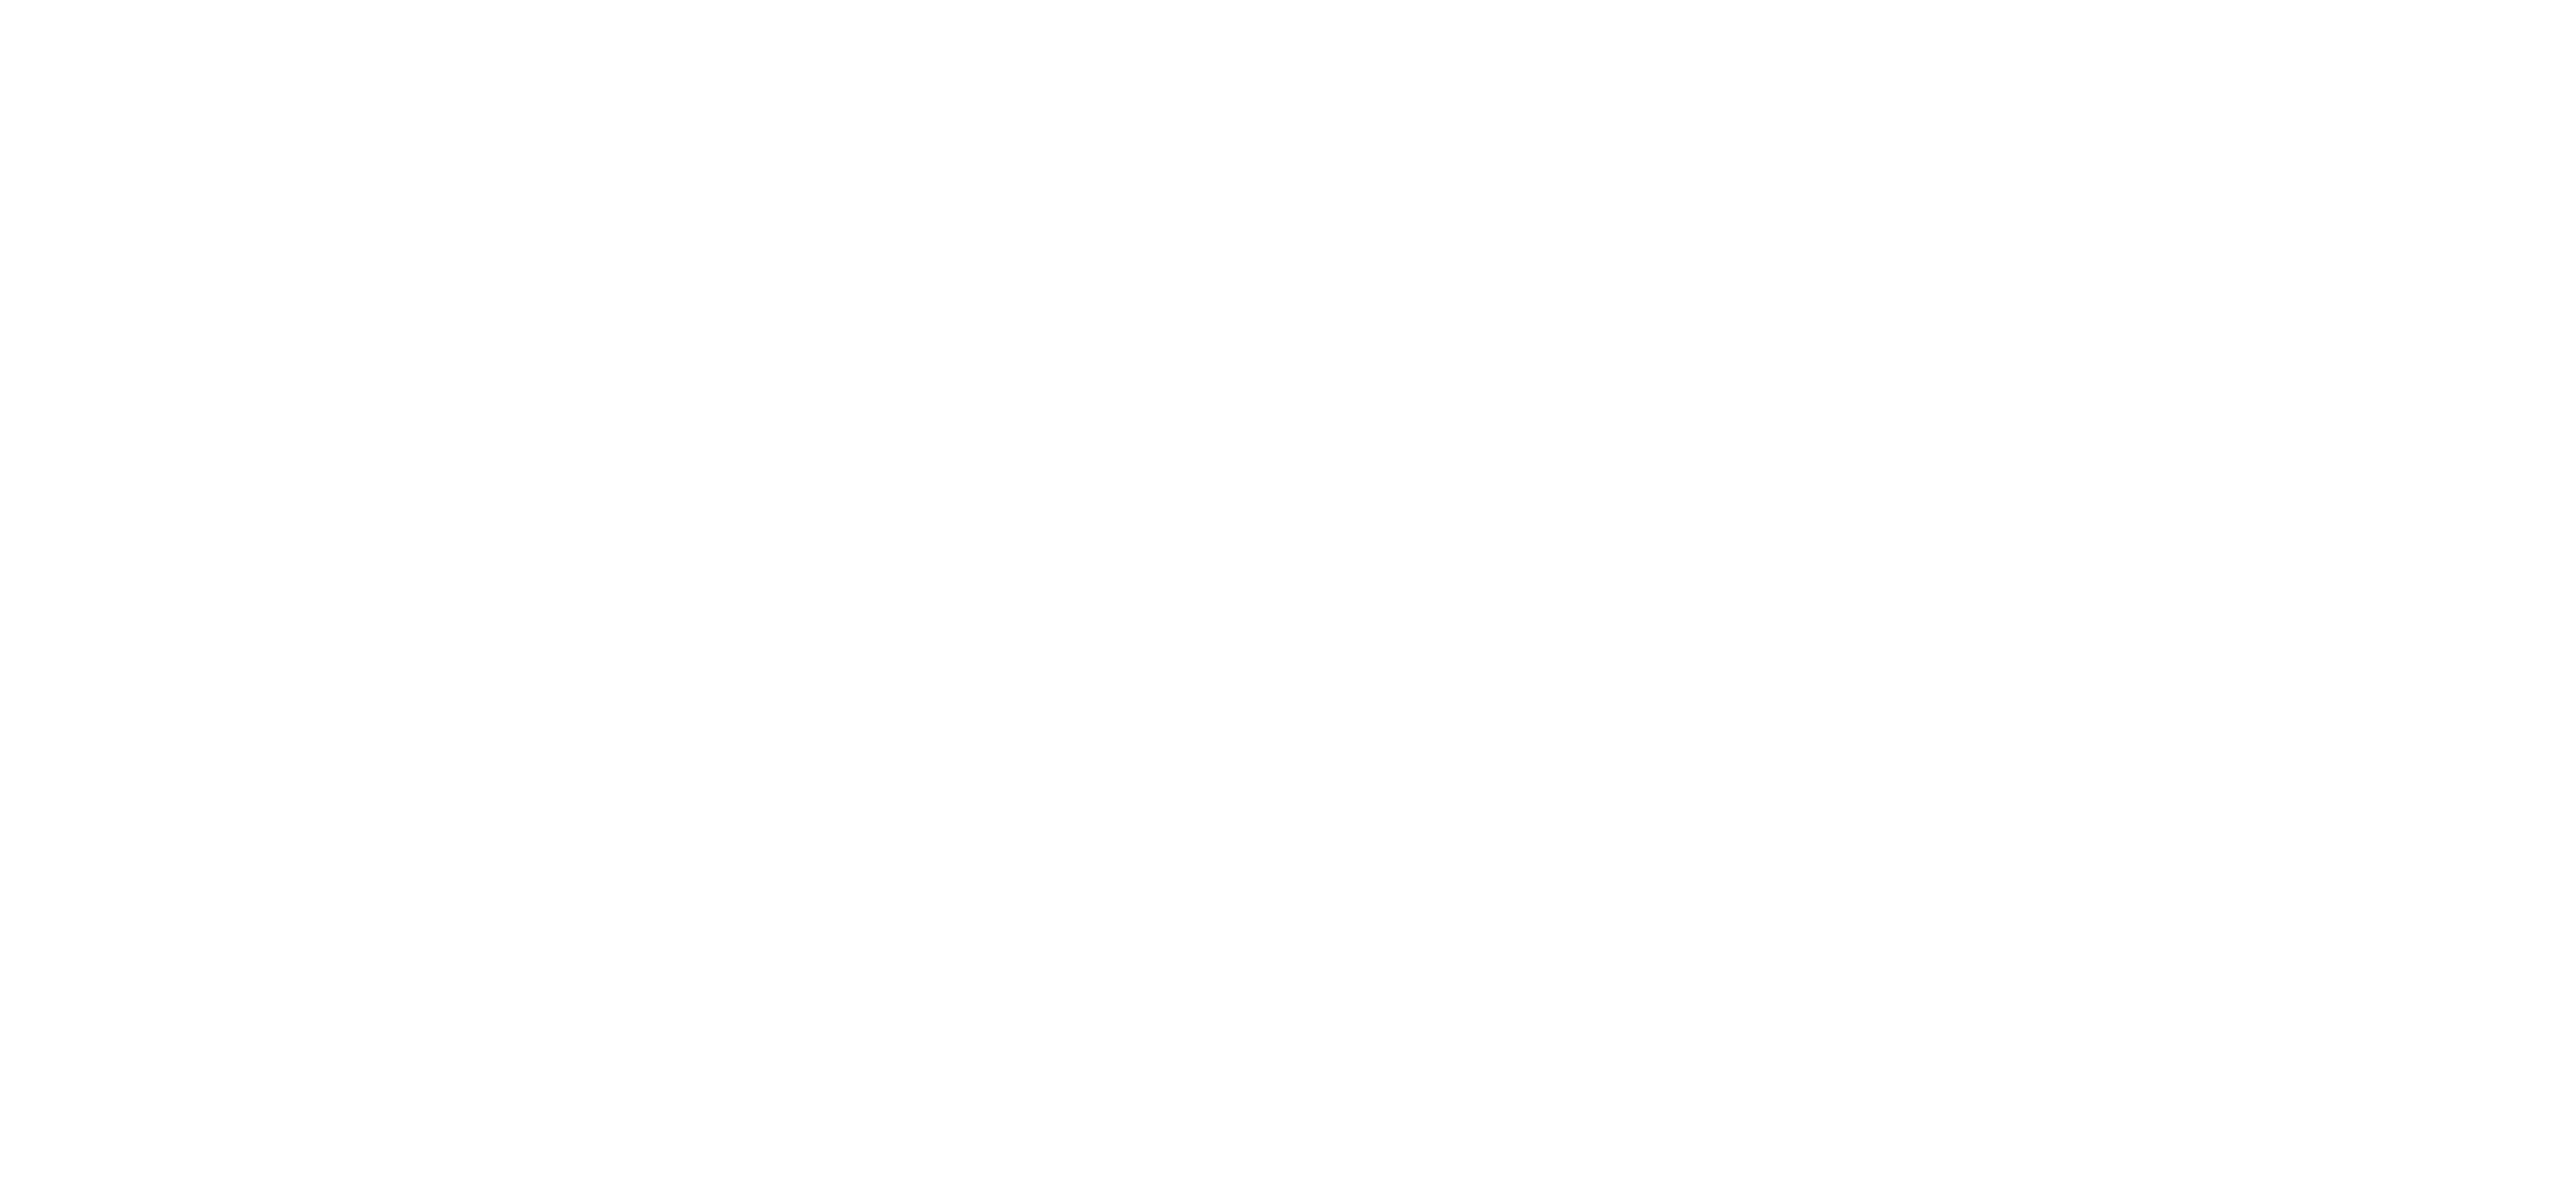 The Silver Duck Mortgage Lending